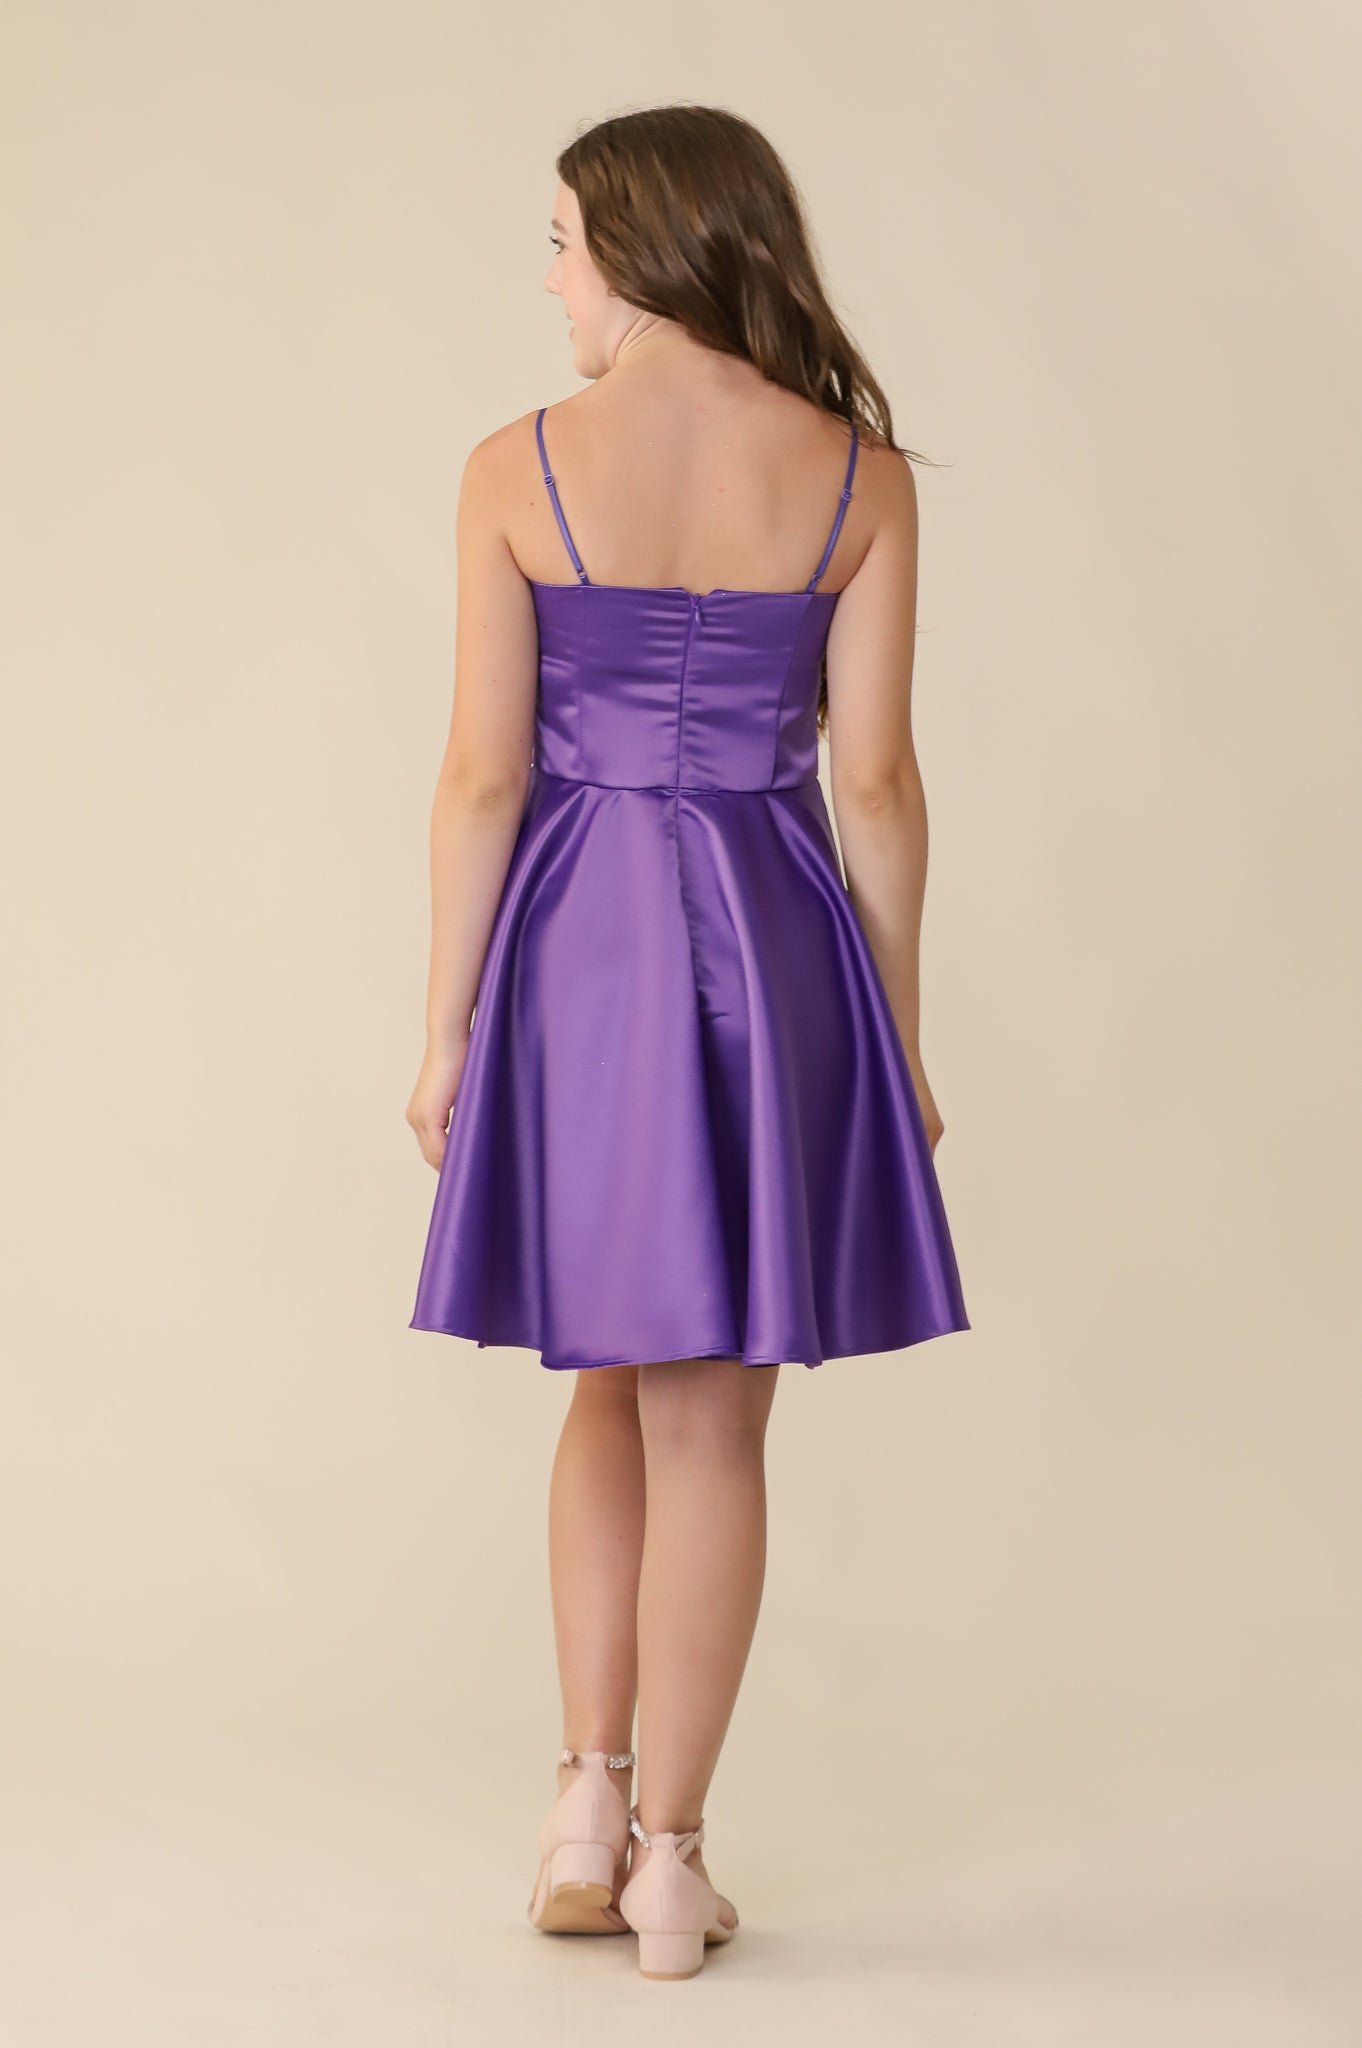 Brown haired girl wearing rich, purple satin party dress hitting above the knee with a sparkle heel shoe.